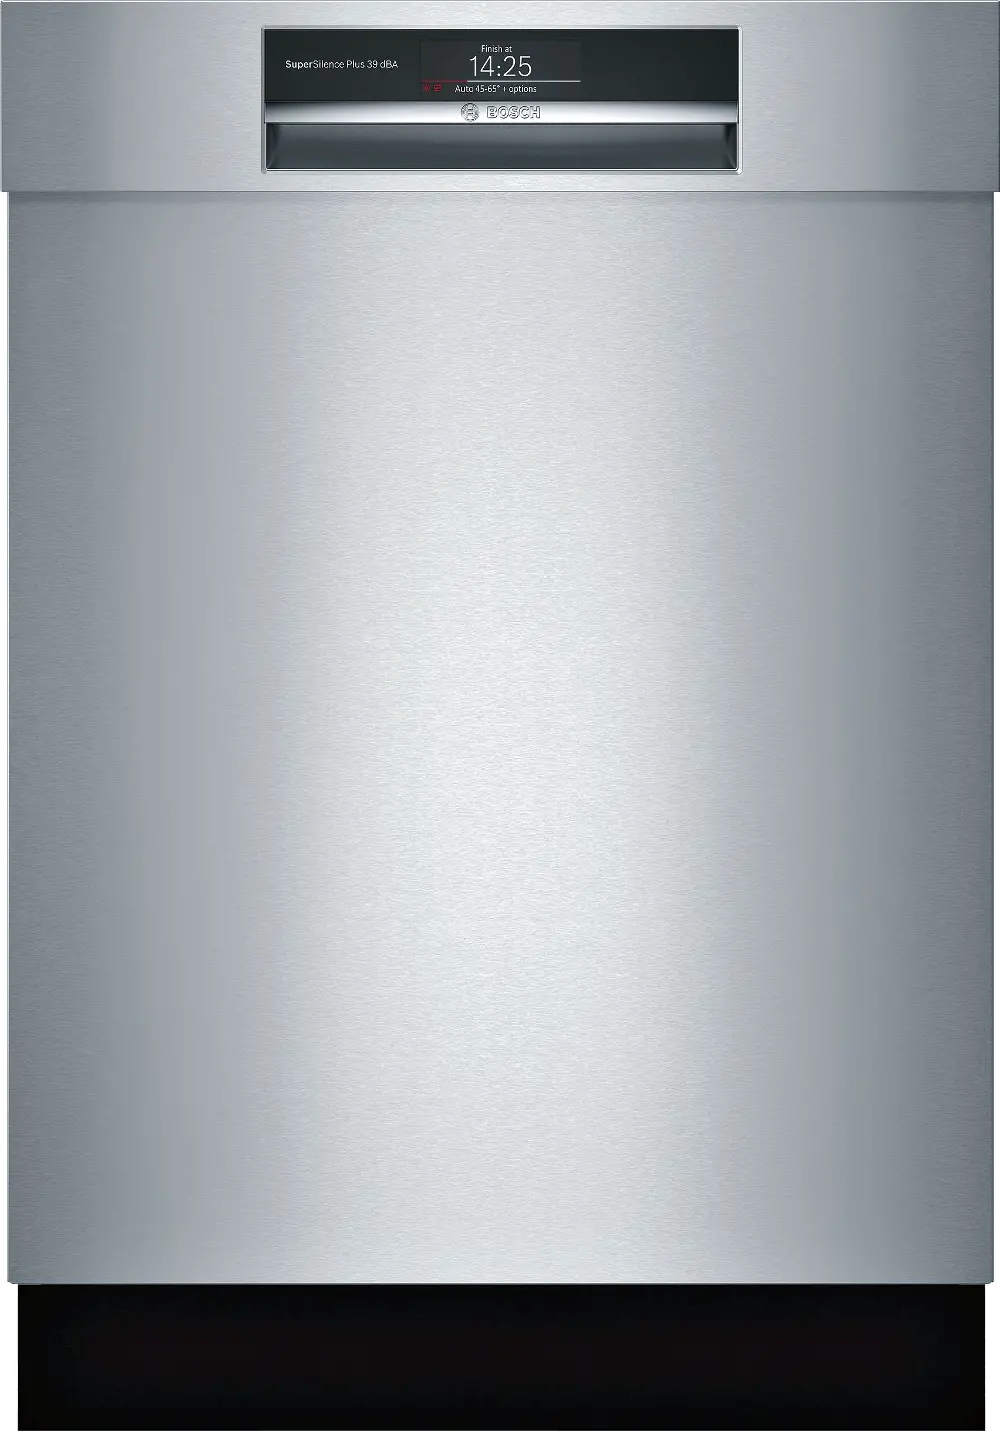 SHE89PW55N Bosch Benchmark Series Dishwasher - Stainless Steel-1